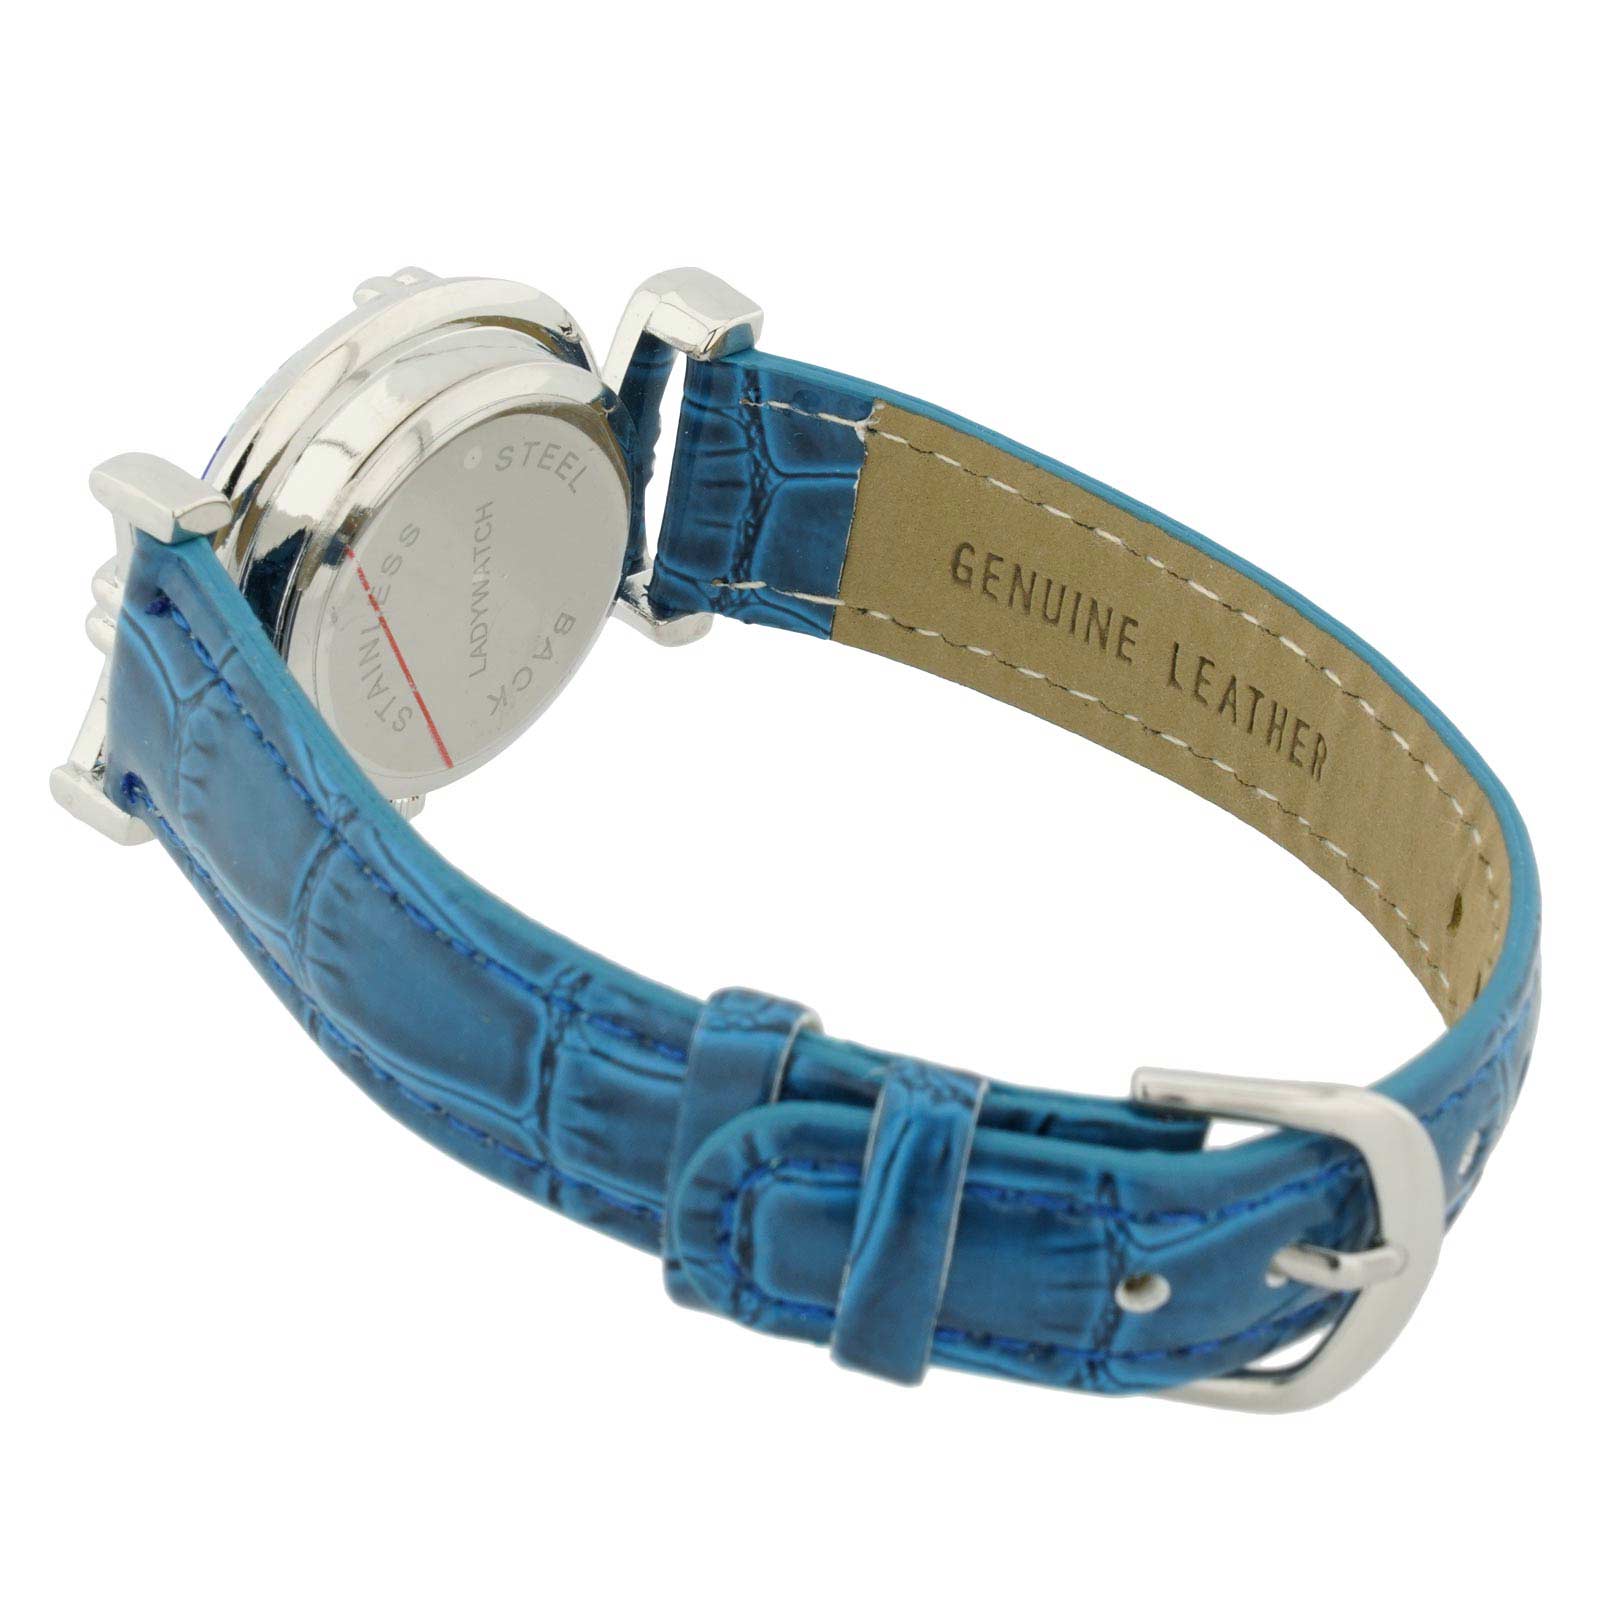 Murano Millefiori Watch With Leather Band - Blue